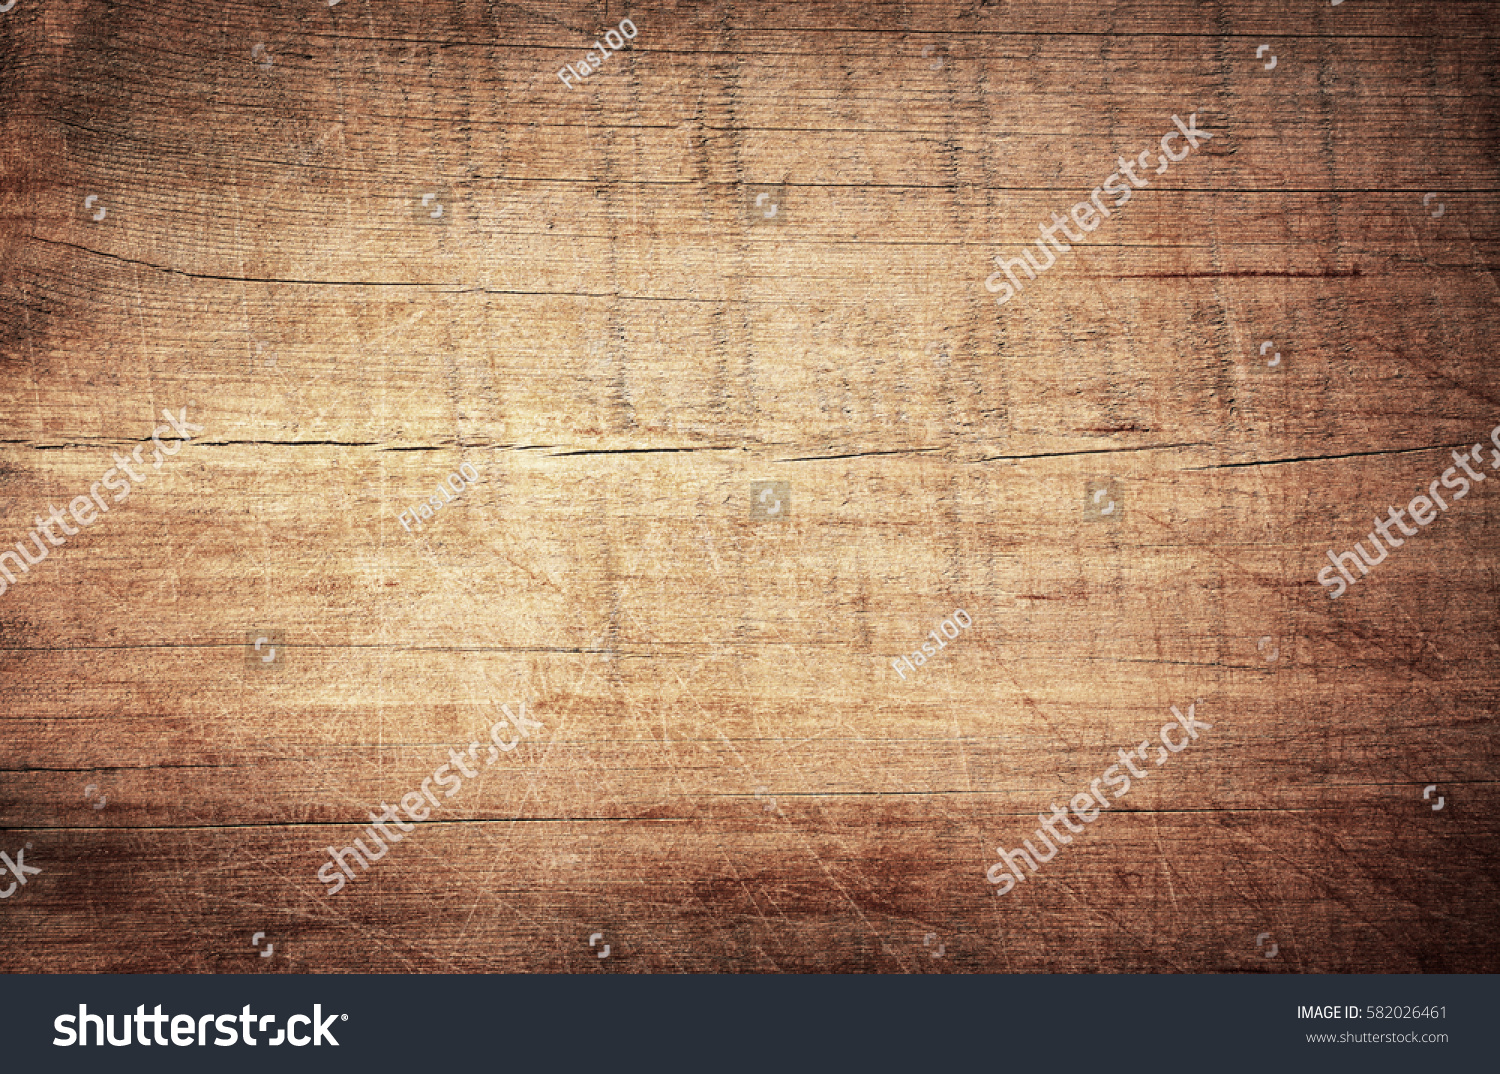 Brown scratched wooden cutting board. Wood texture #582026461